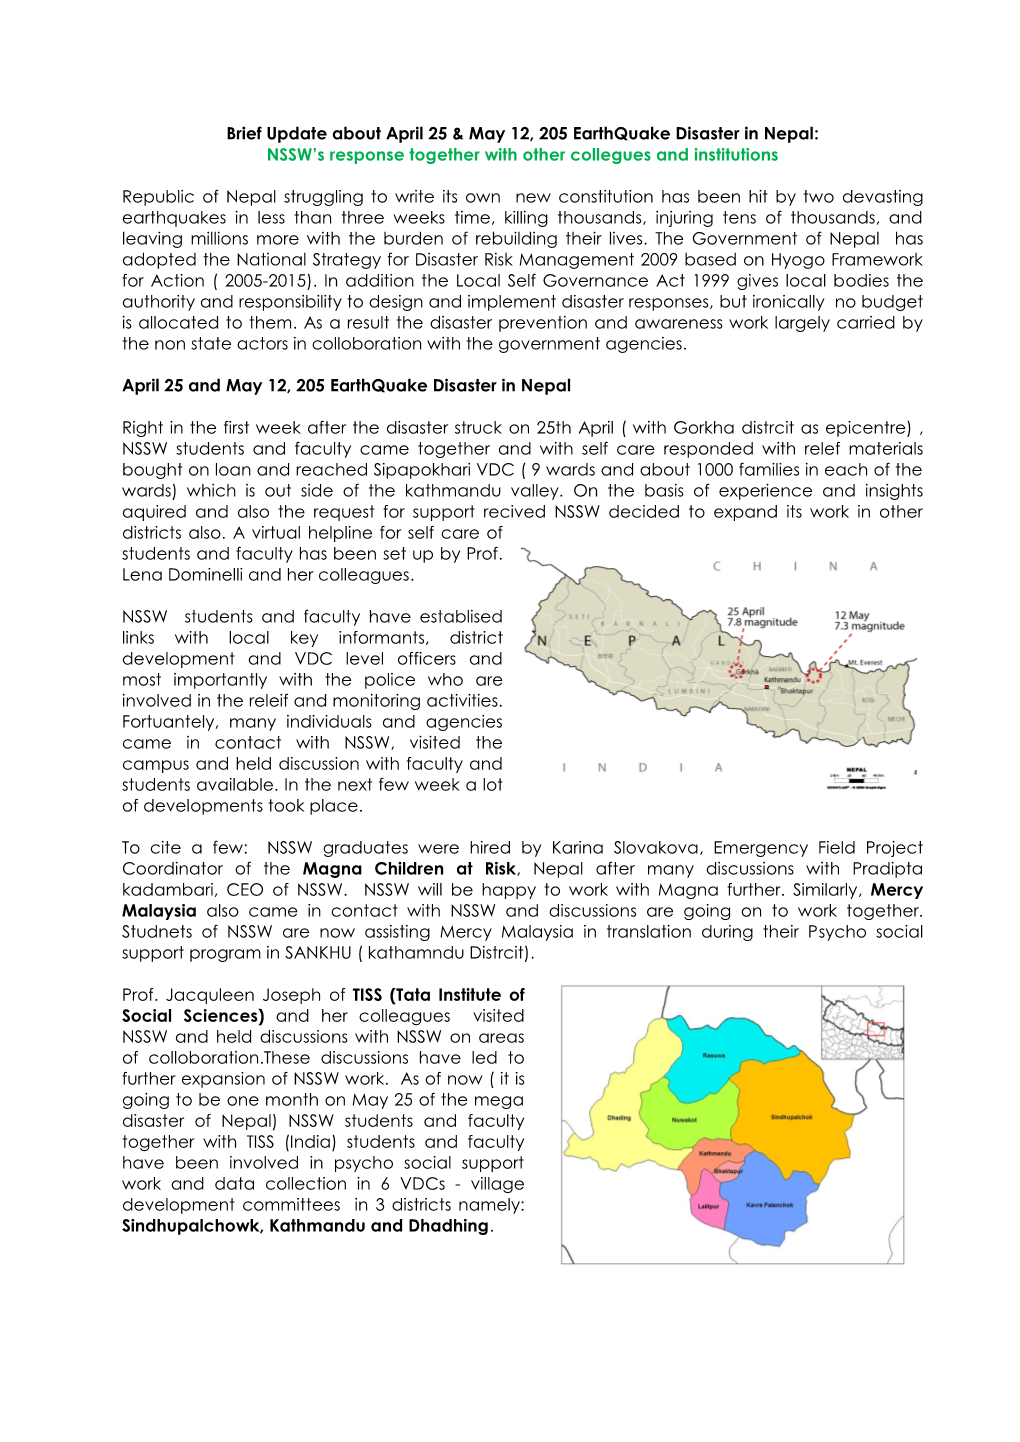 Brief Update About April 25 & May 12, 205 Earthquake Disaster in Nepal